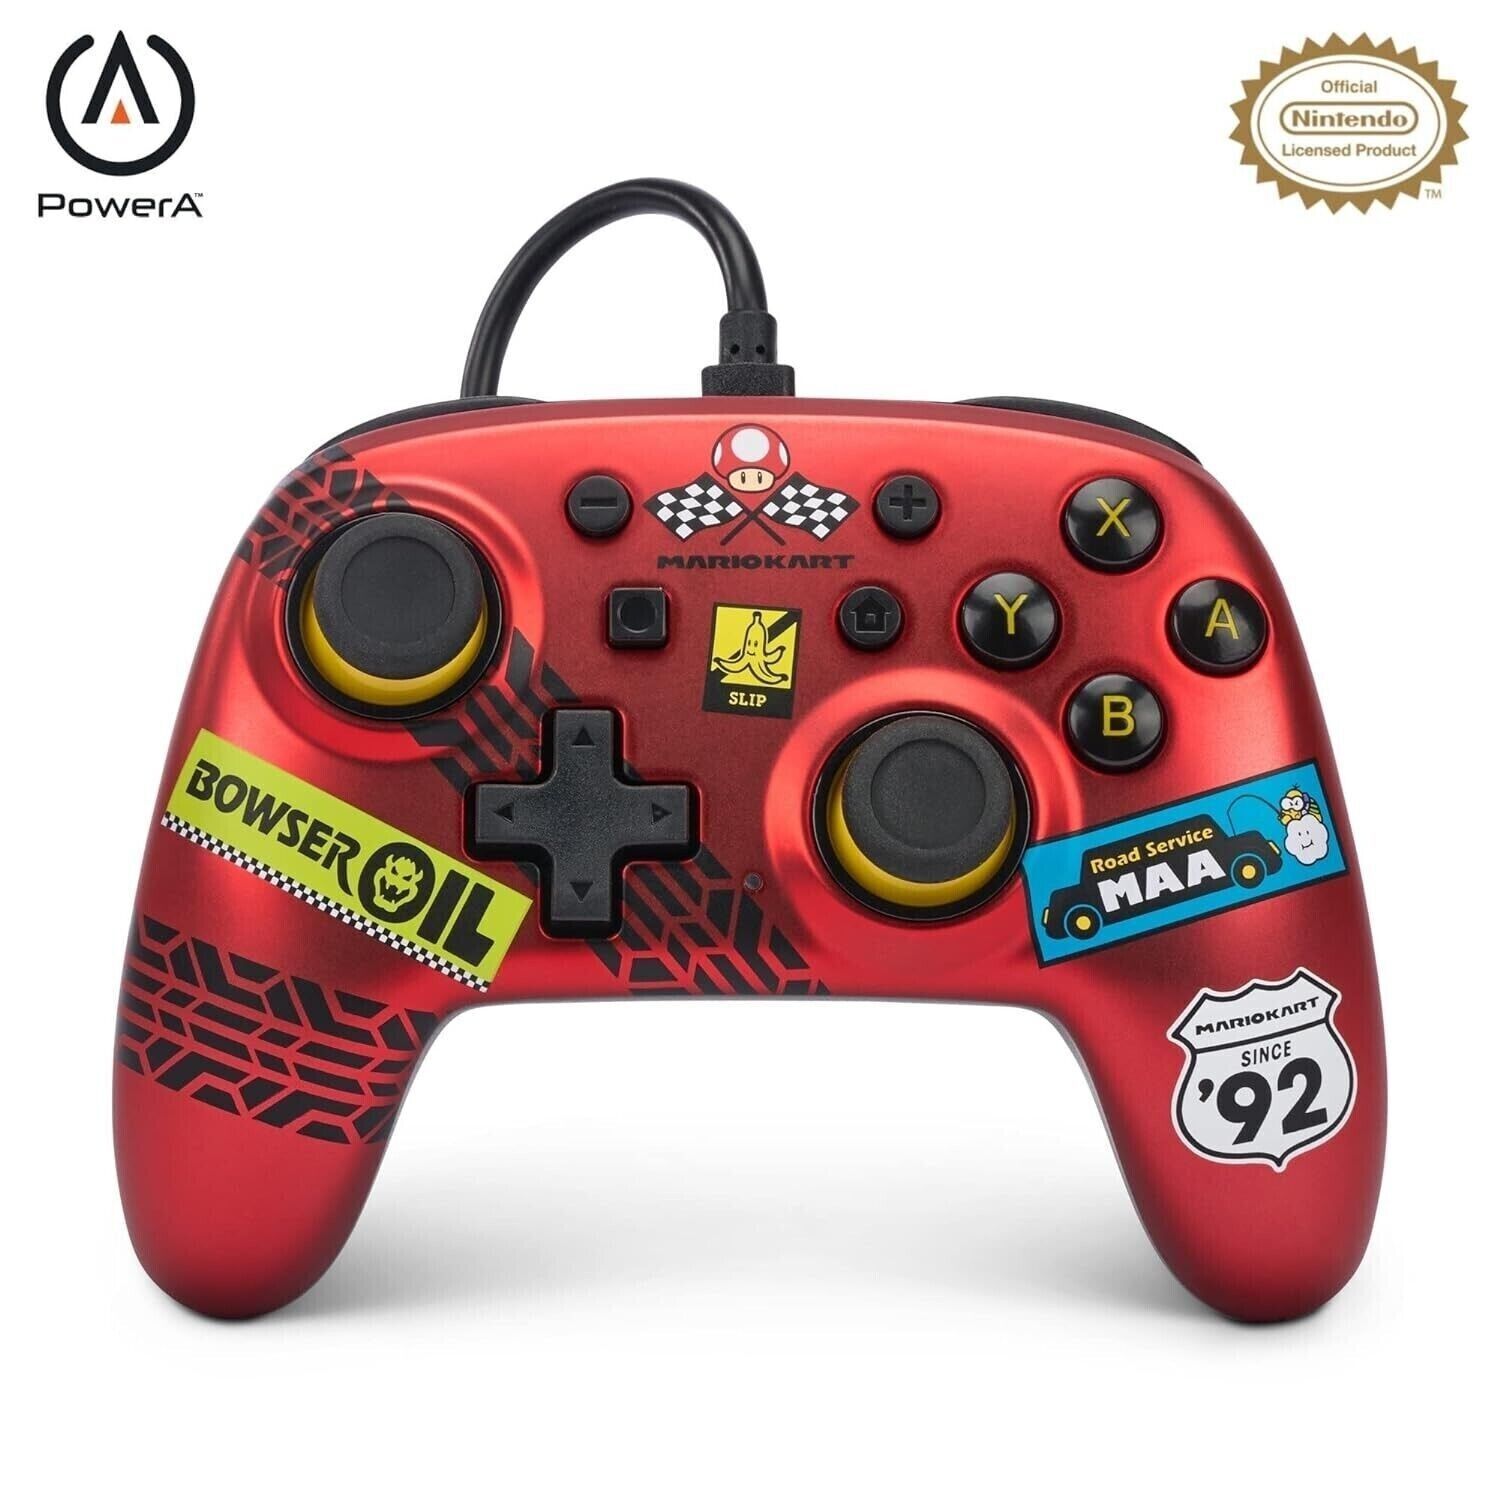 Primary image for PowerA Wired Nano Controller for Nintendo Switch - Mario Kart: Racer Red